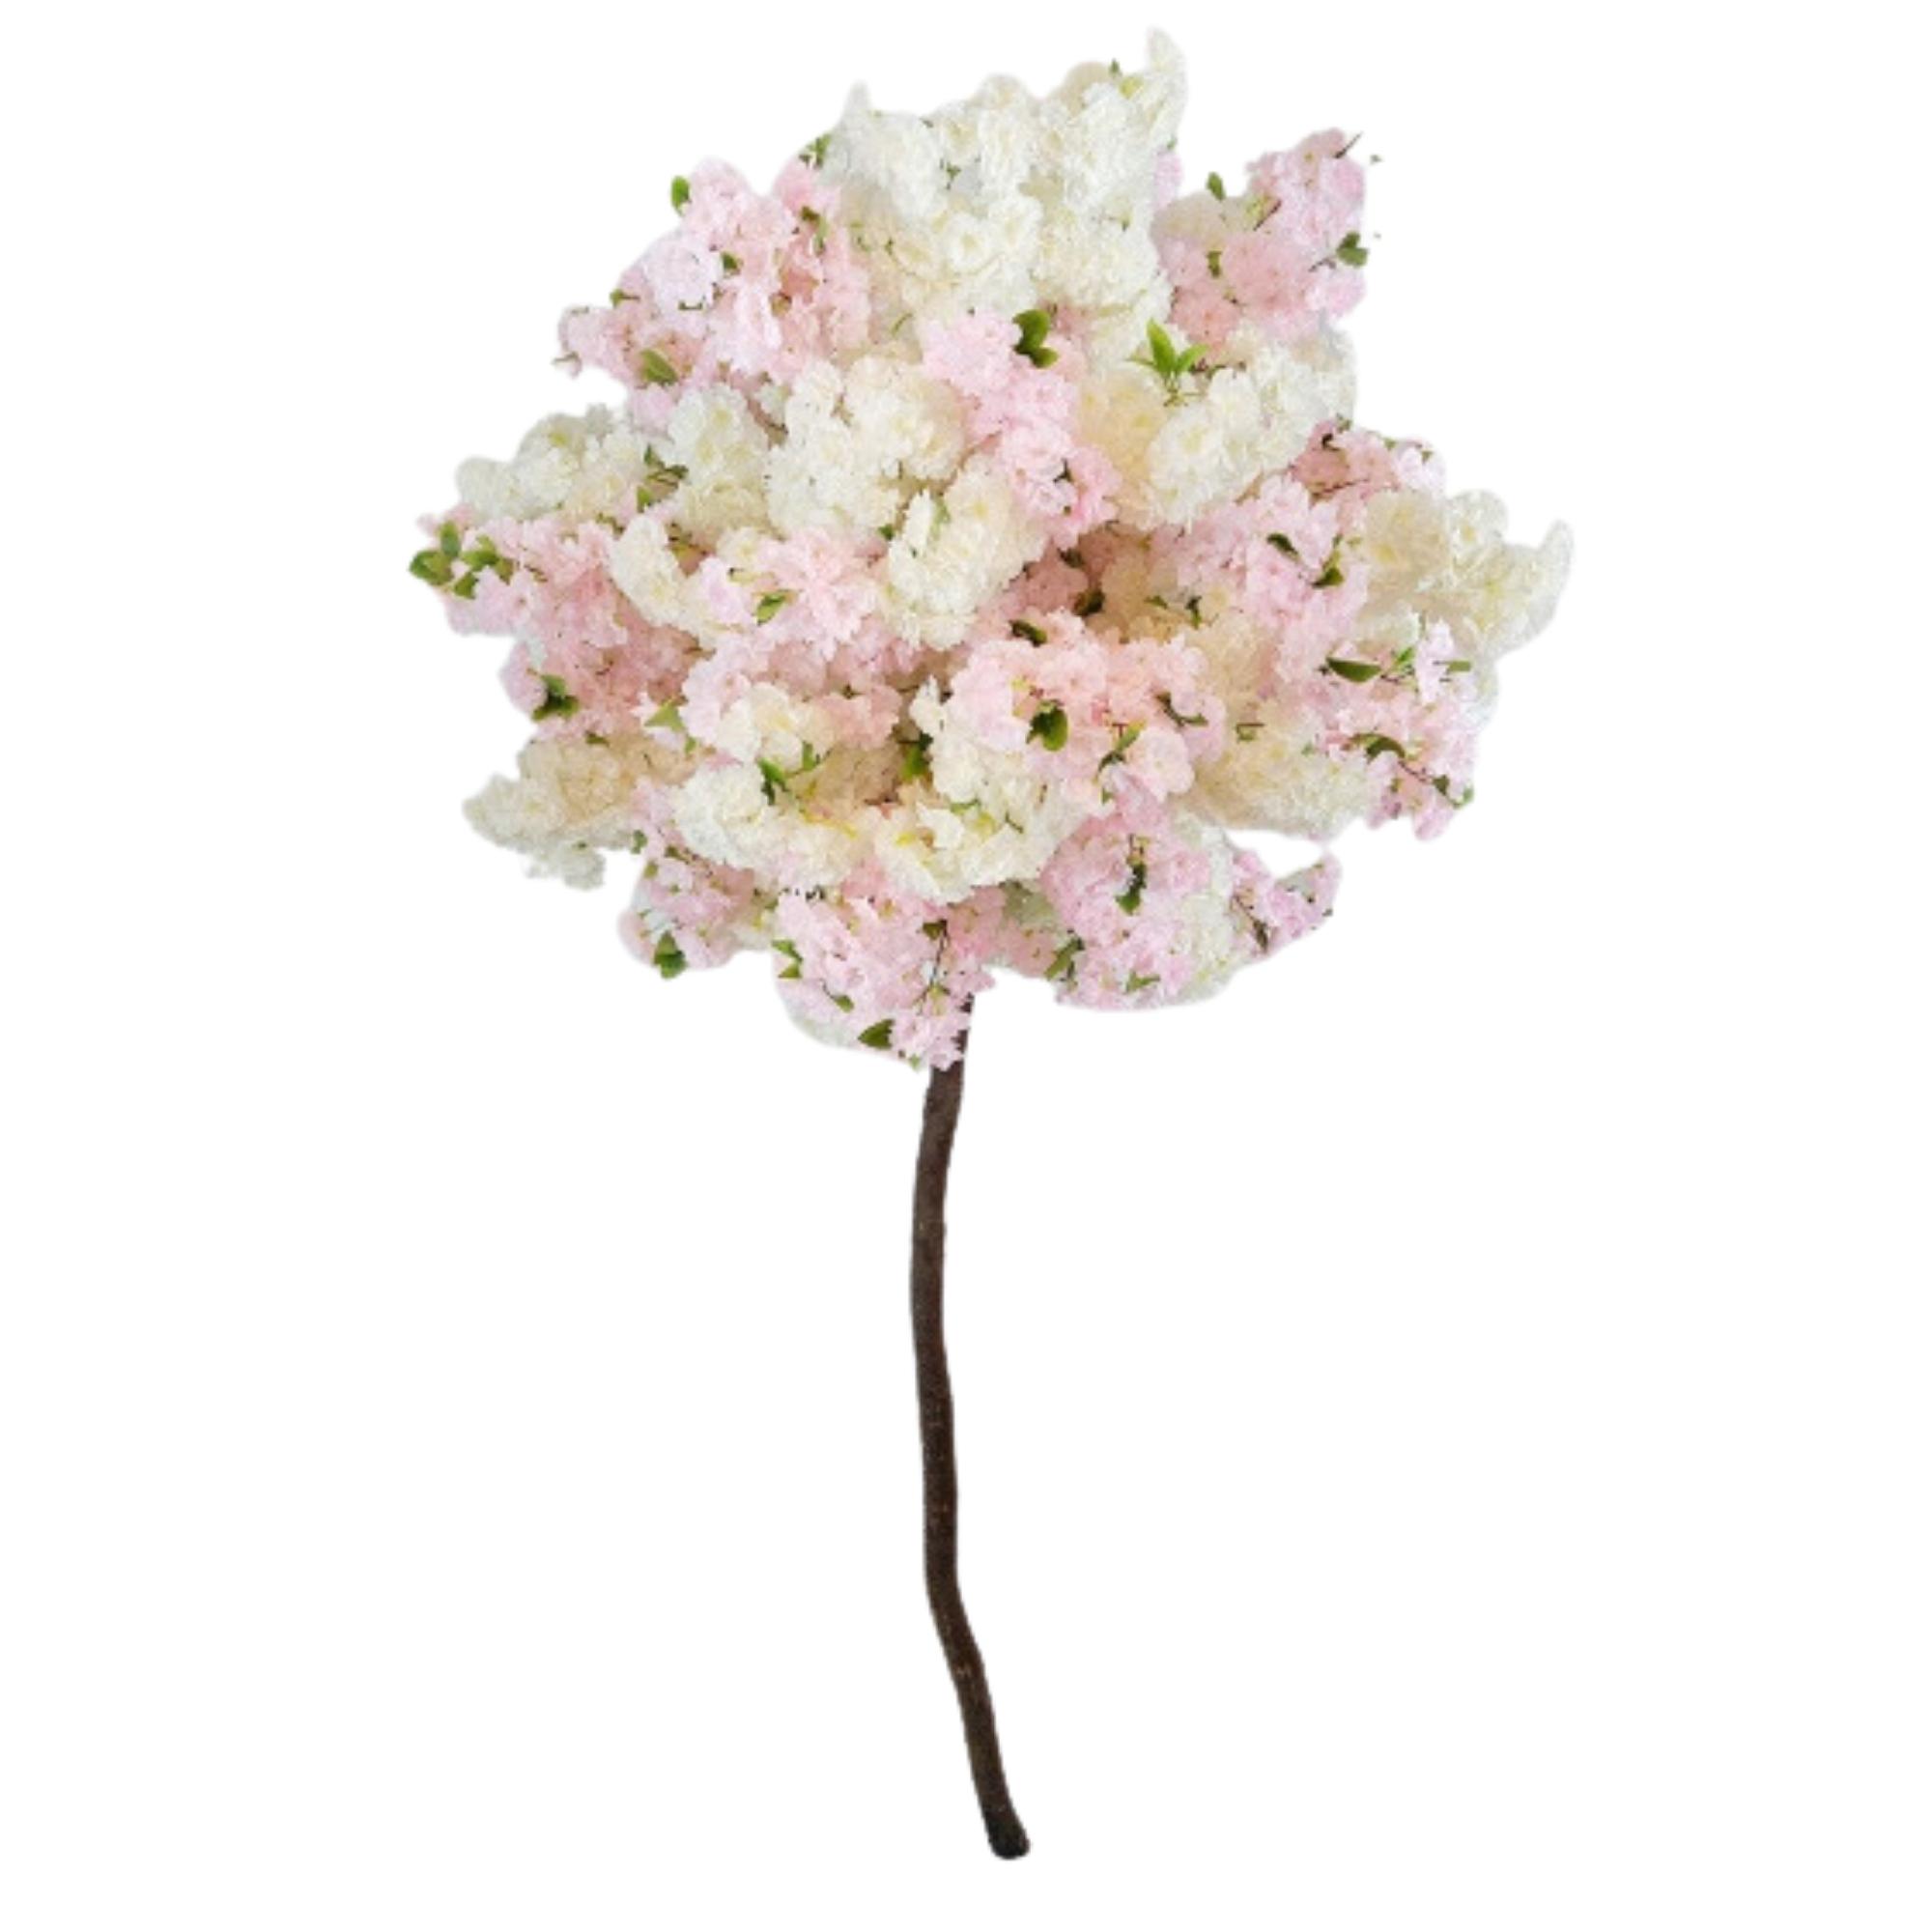 White Cherry Blossom tree with pink cherry blossoms 7.5 foot tall